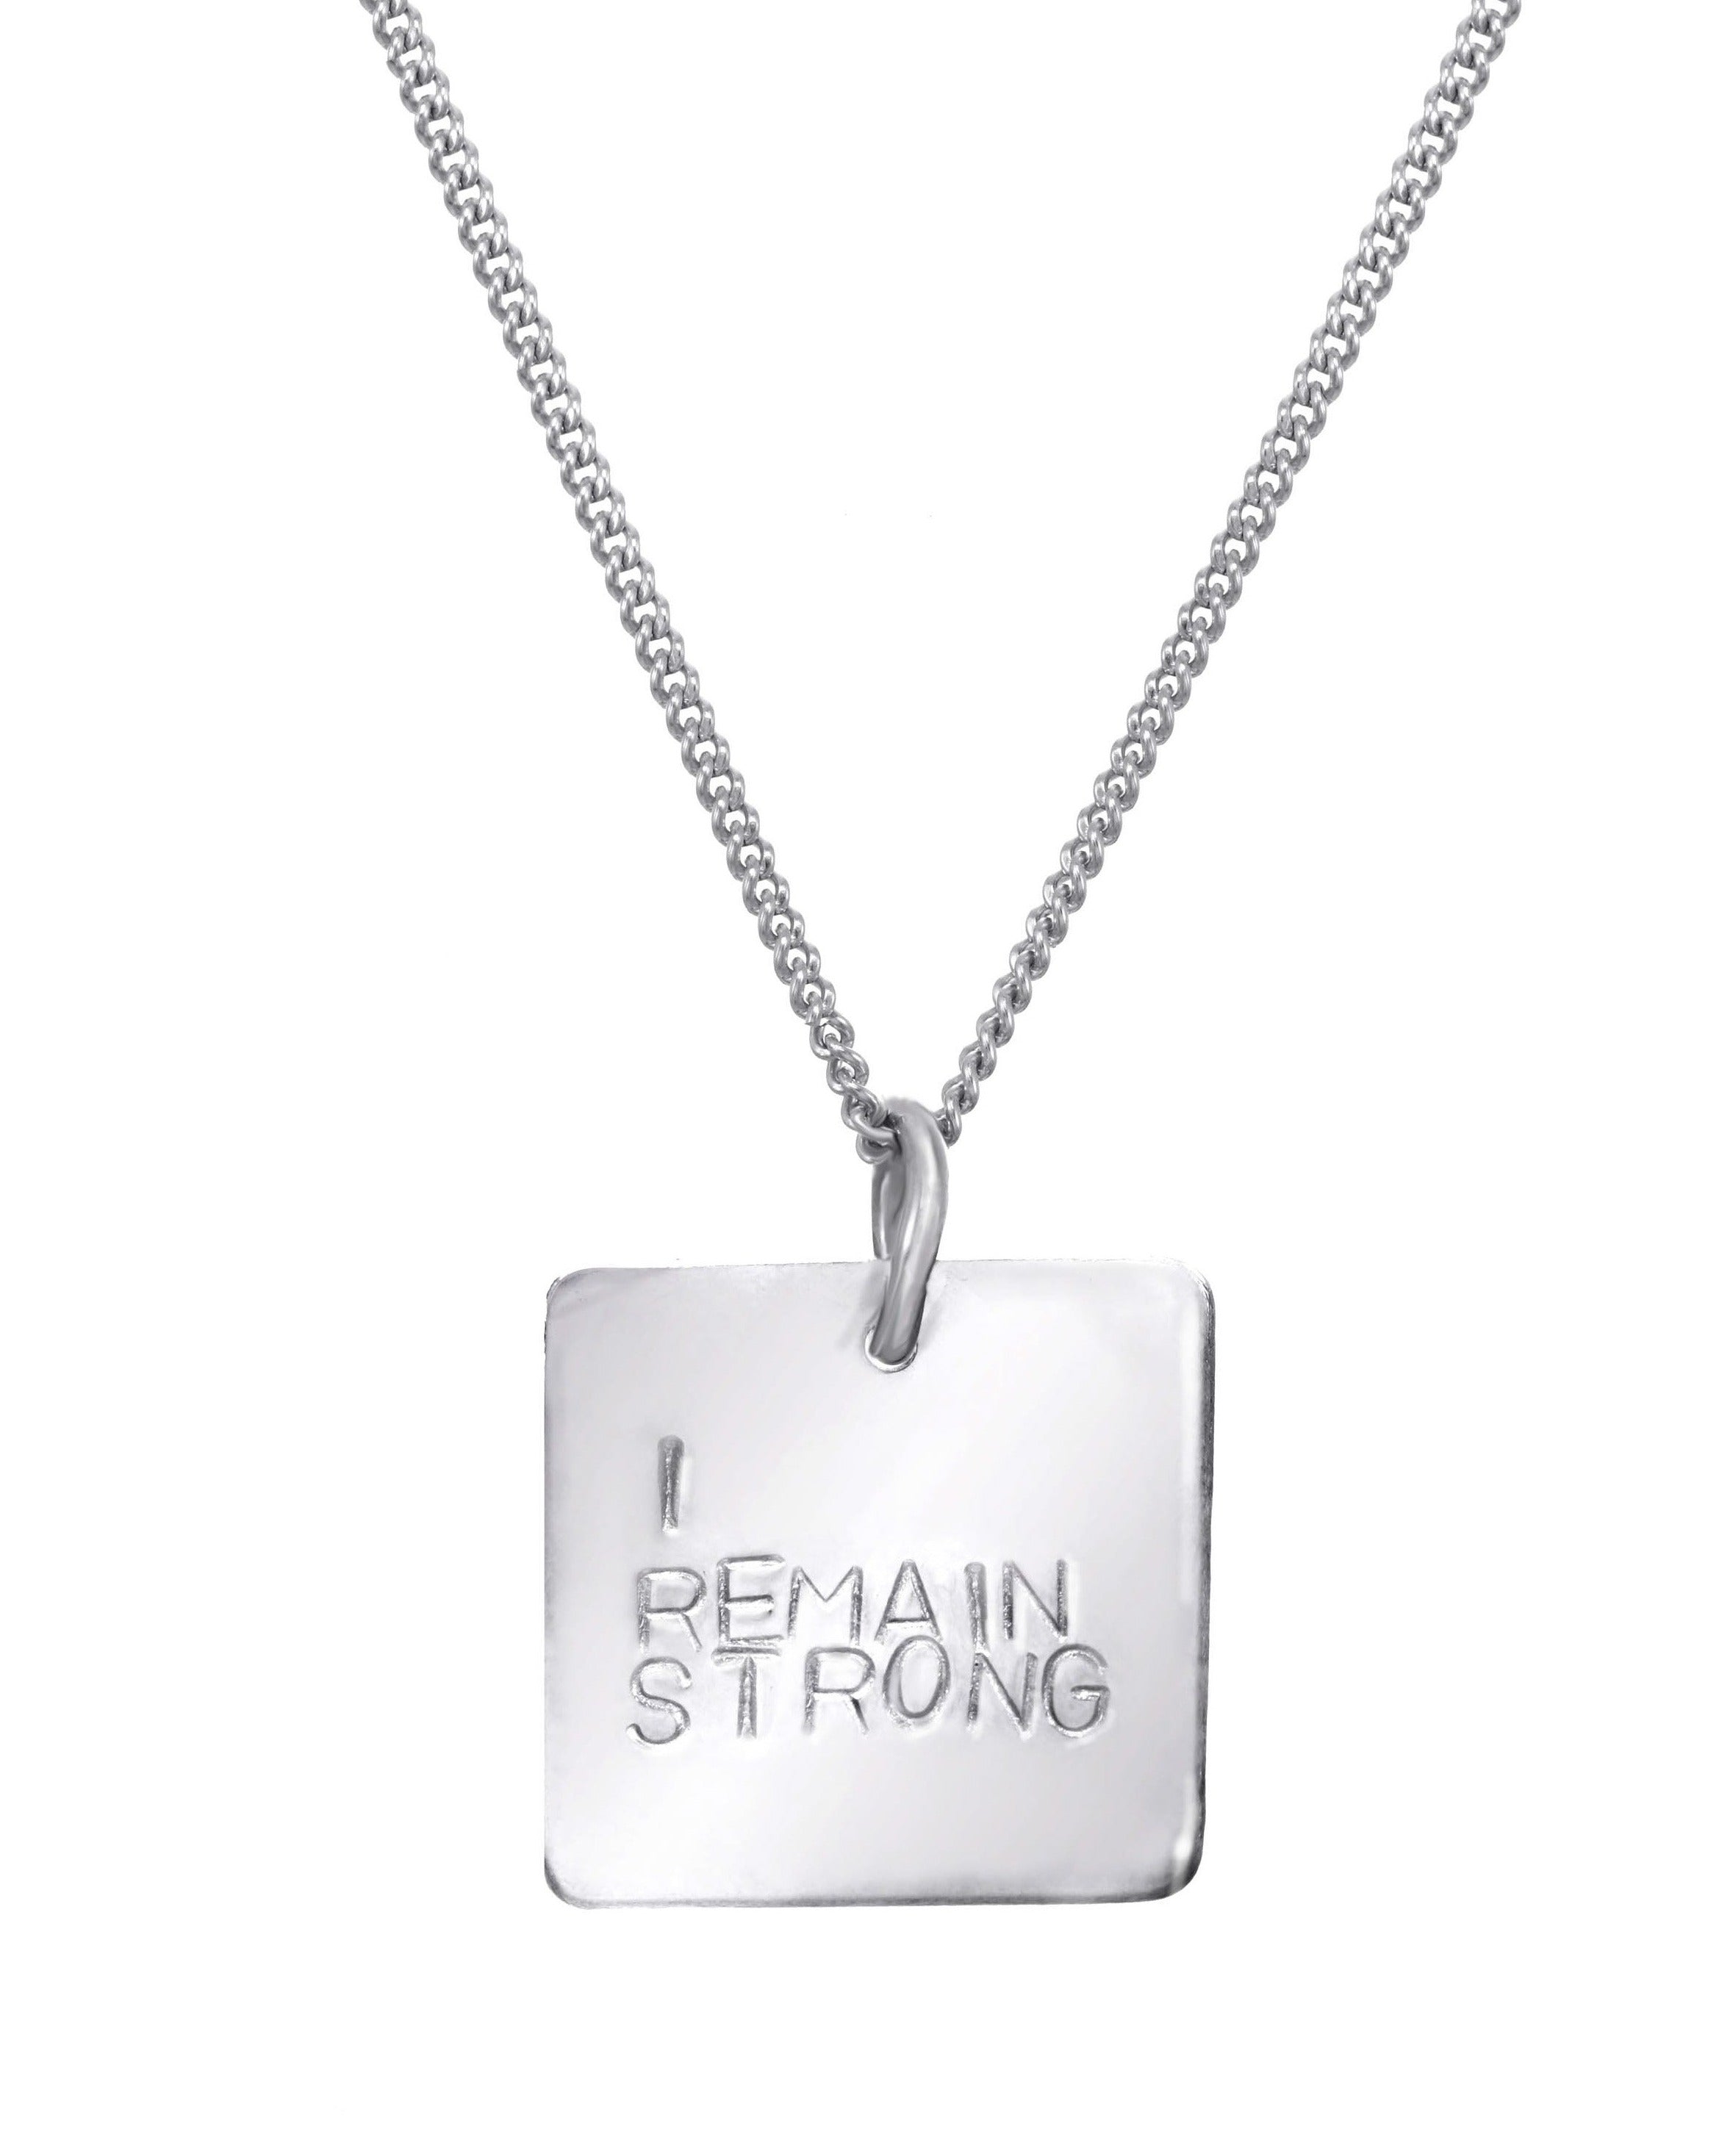 Zola Necklace by KOZAKH. A 16 to 18 inch adjustable length necklace, crafted in Sterling Silver, featuring a flat square pendant with engraved customizable quote.